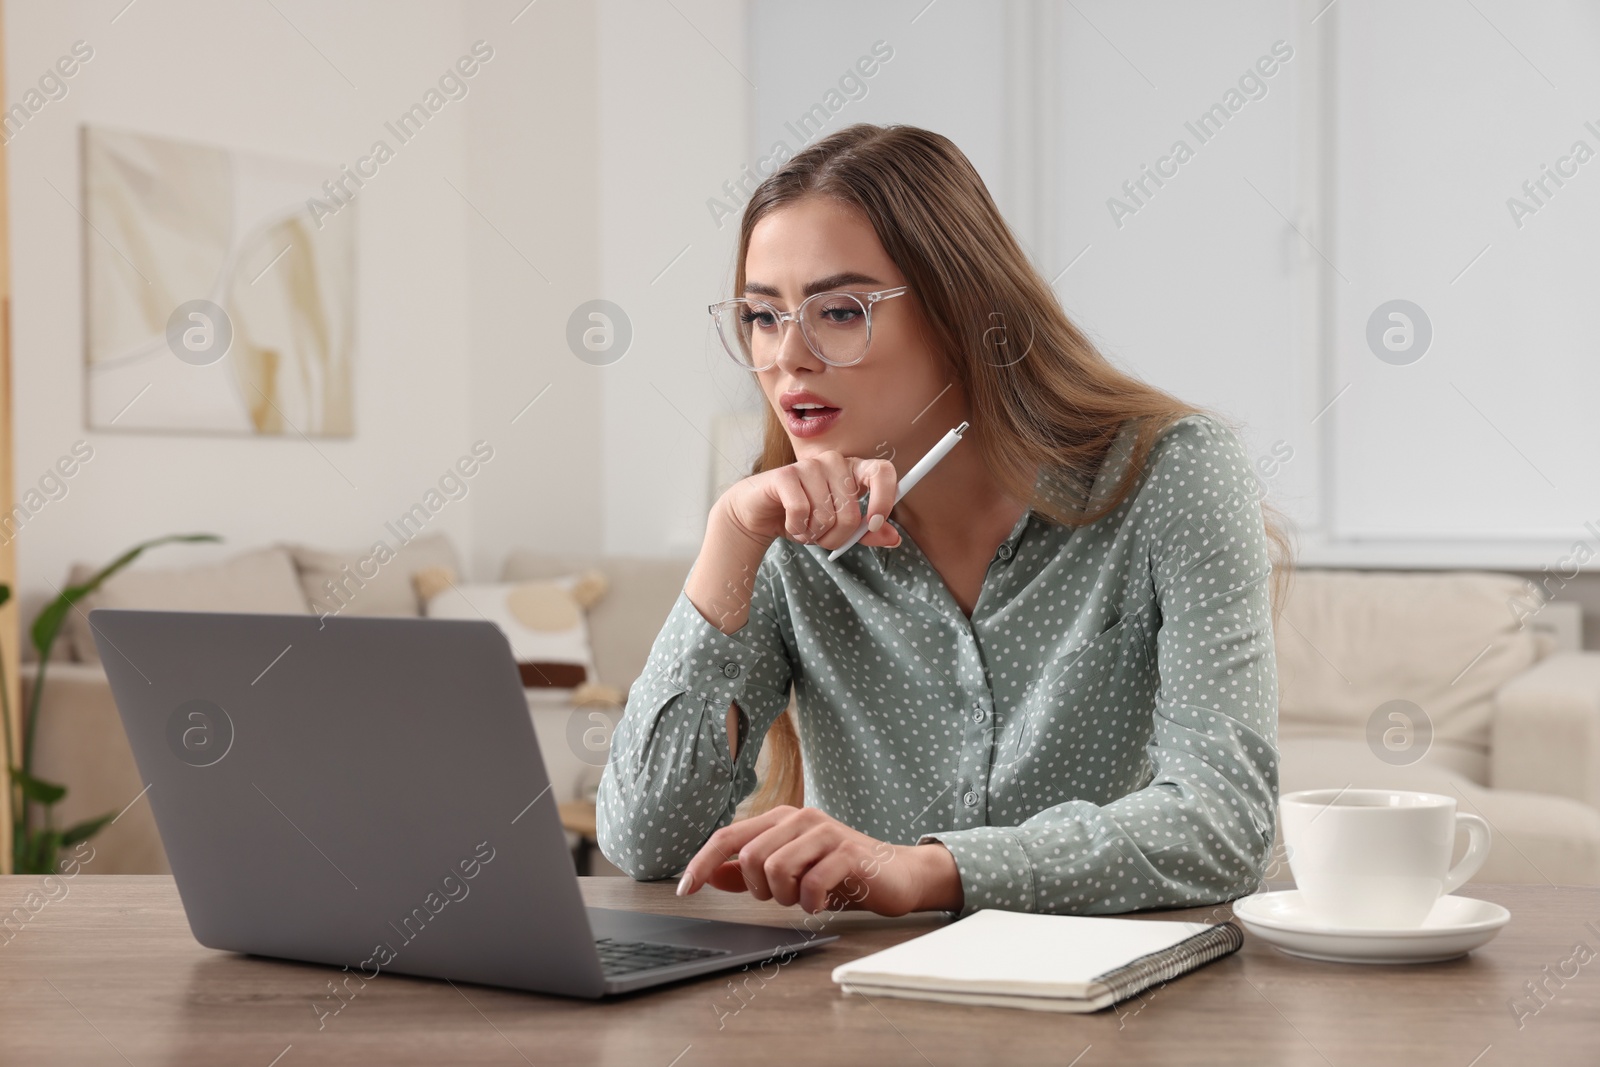 Photo of Beautiful woman with laptop at wooden table in room